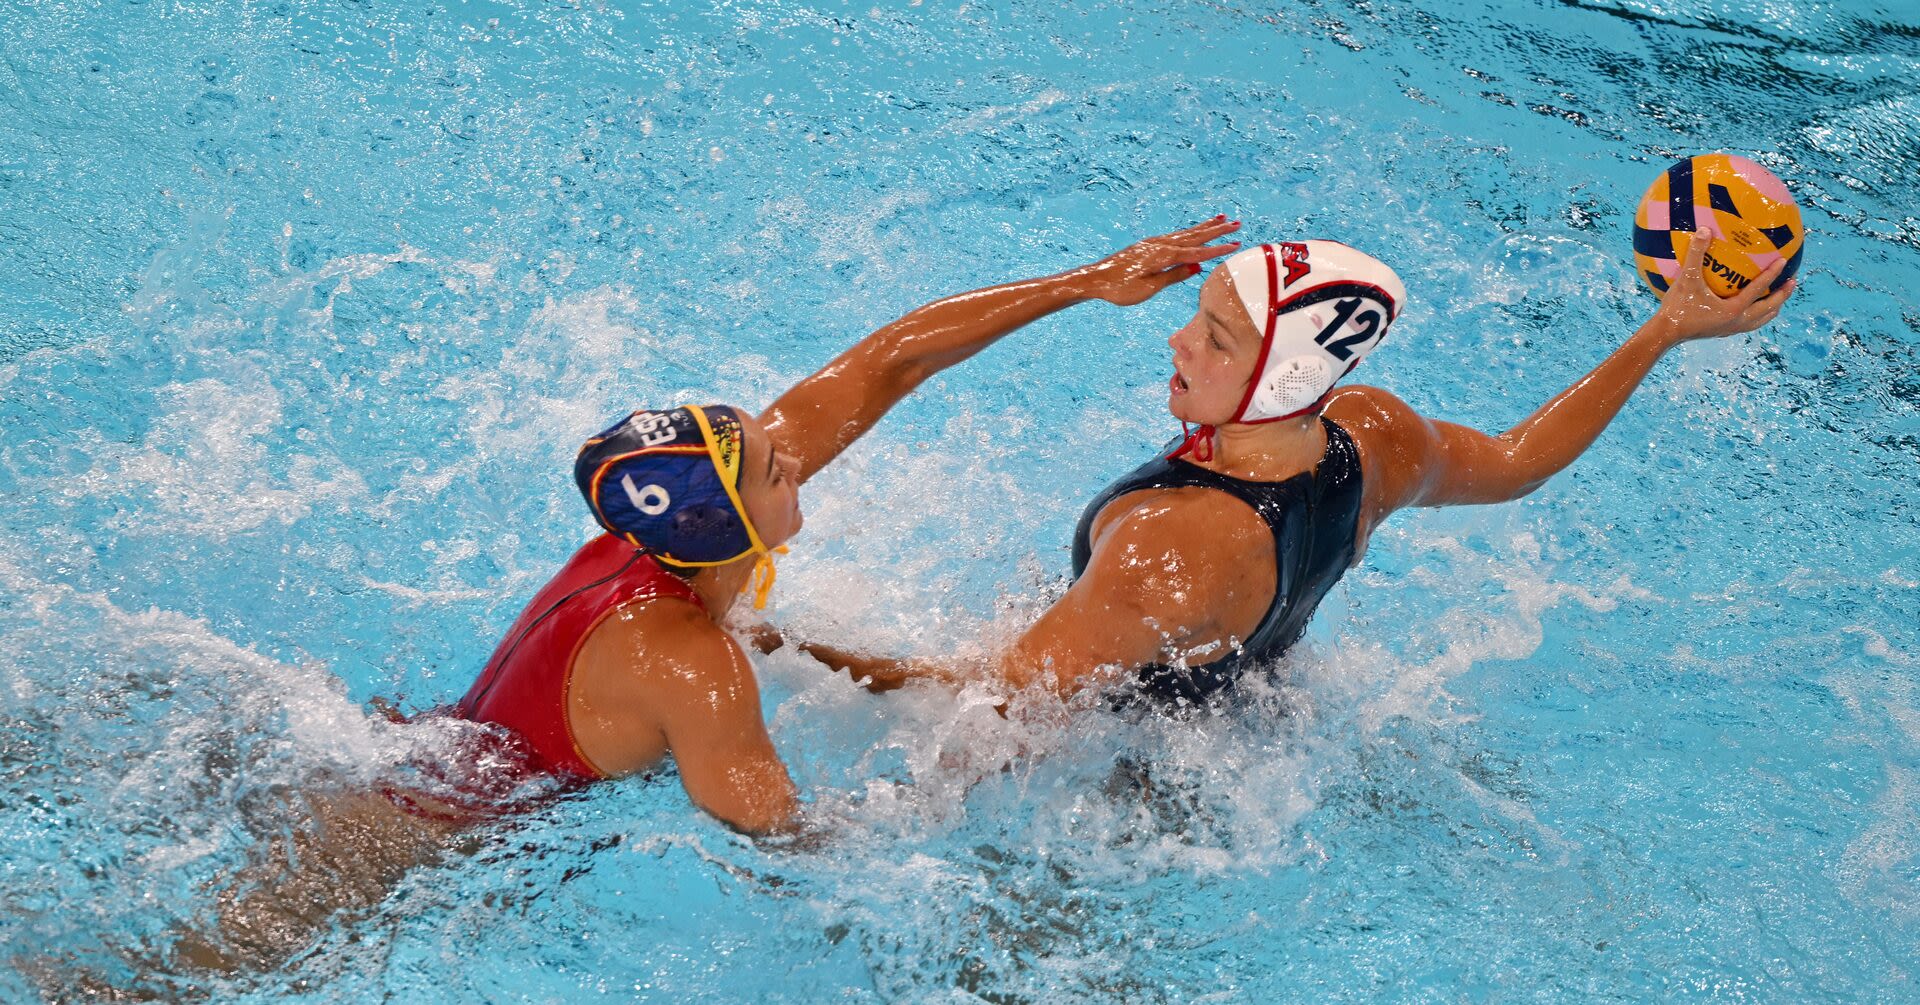 Water Polo-Spain edge three-times reigning Olympic champions U.S.